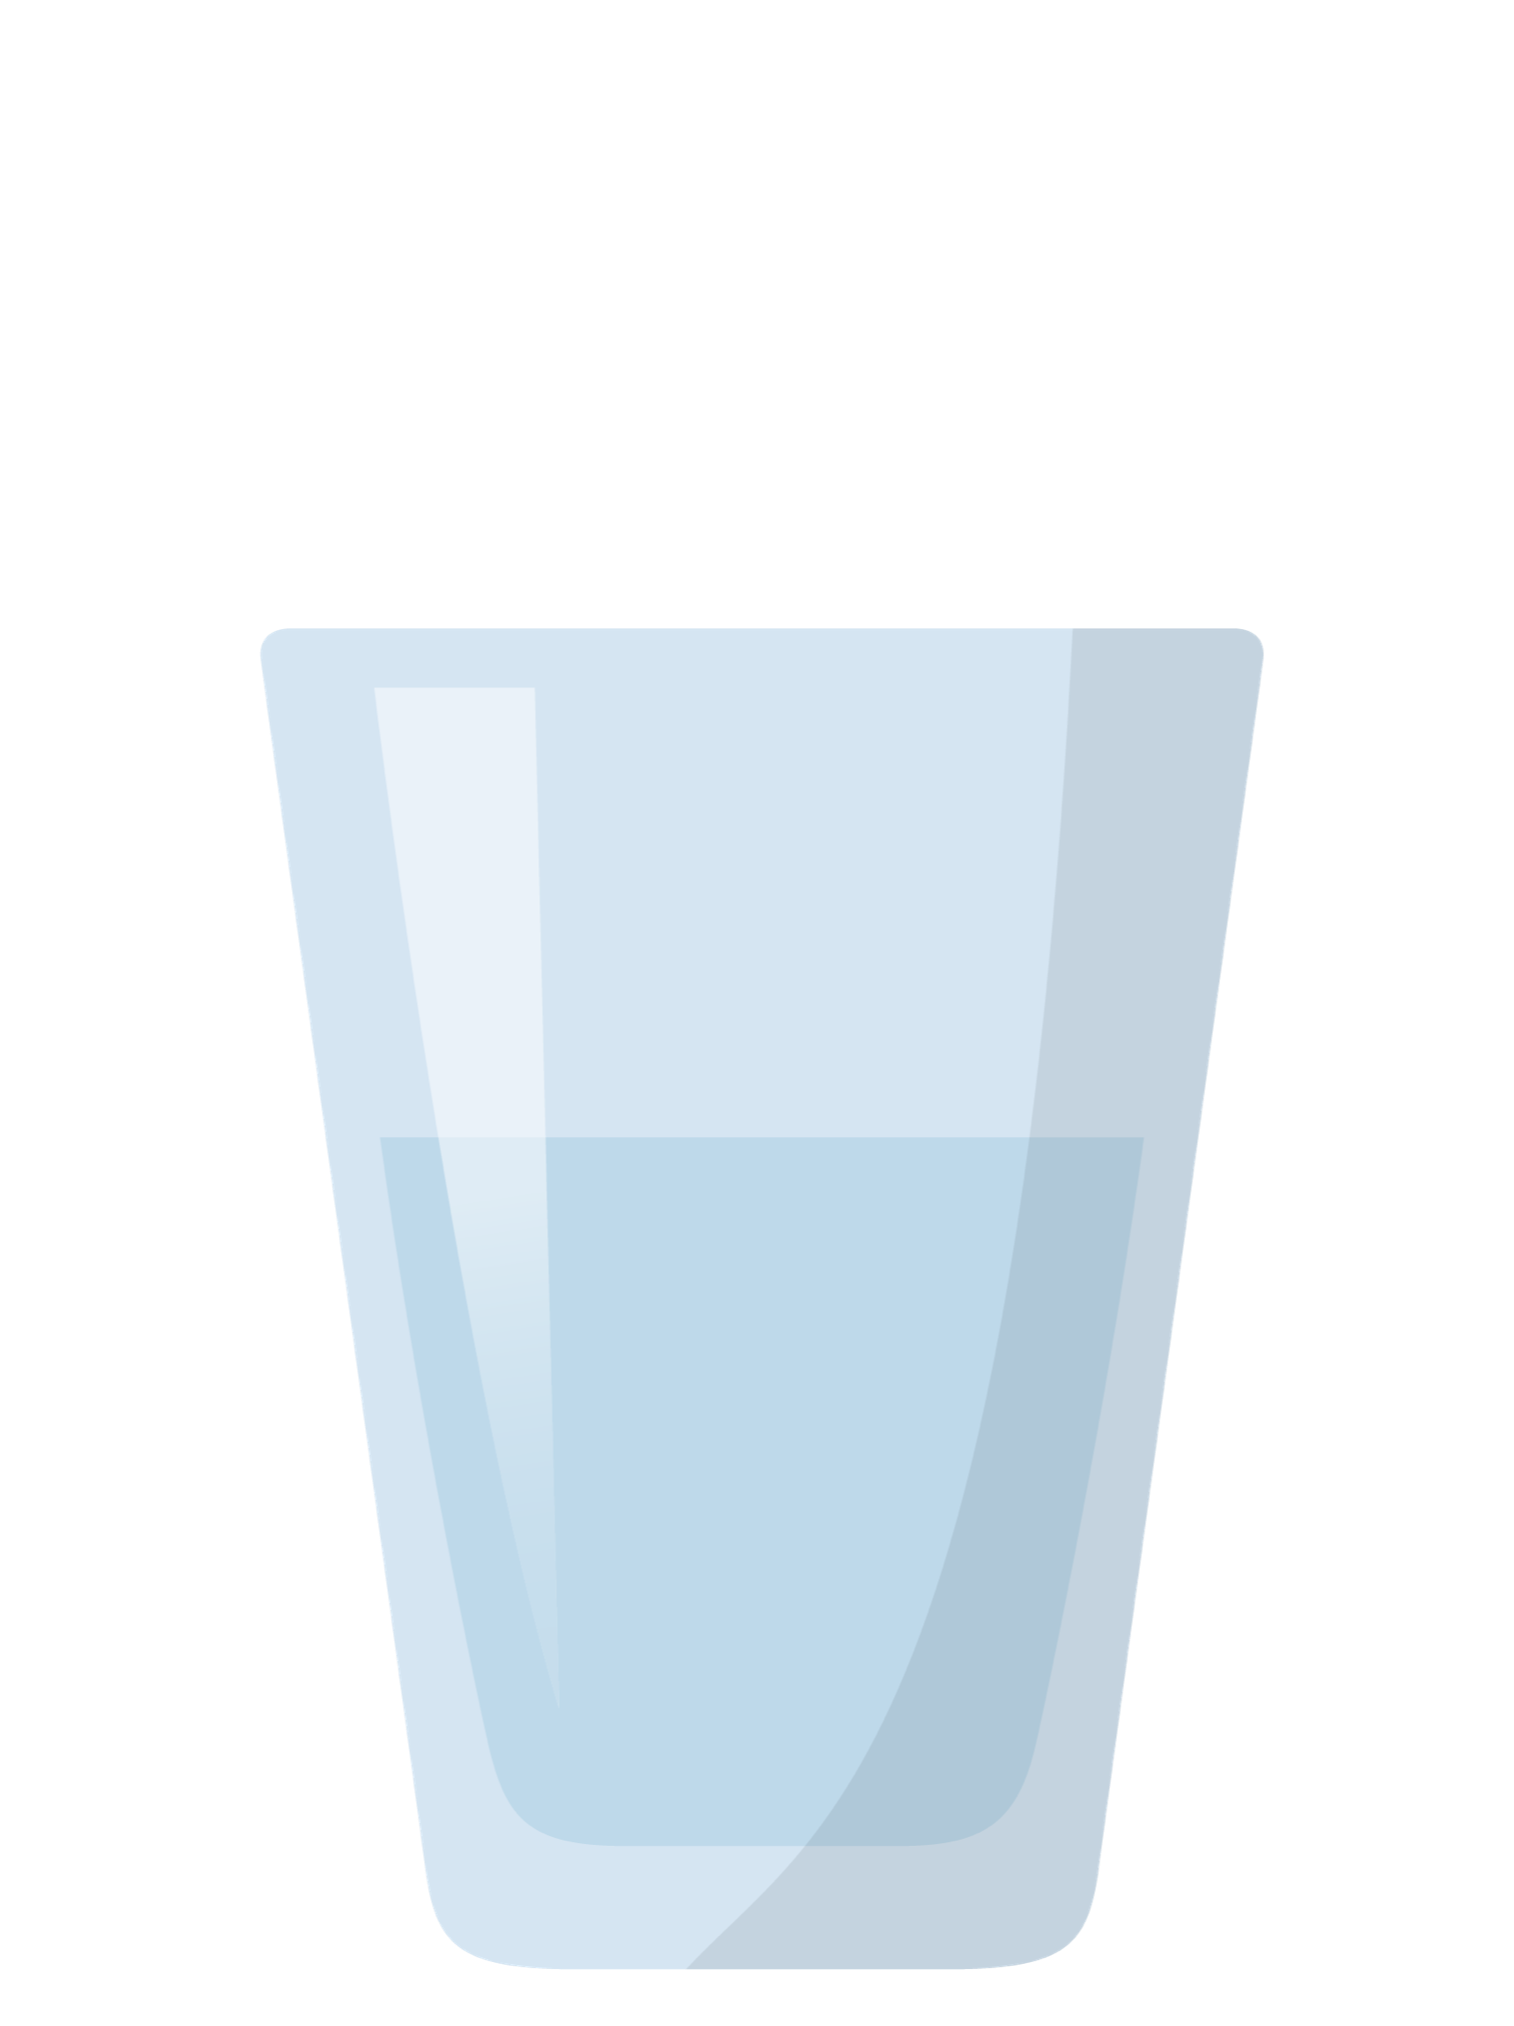 A cartoon drawing of a glass of water